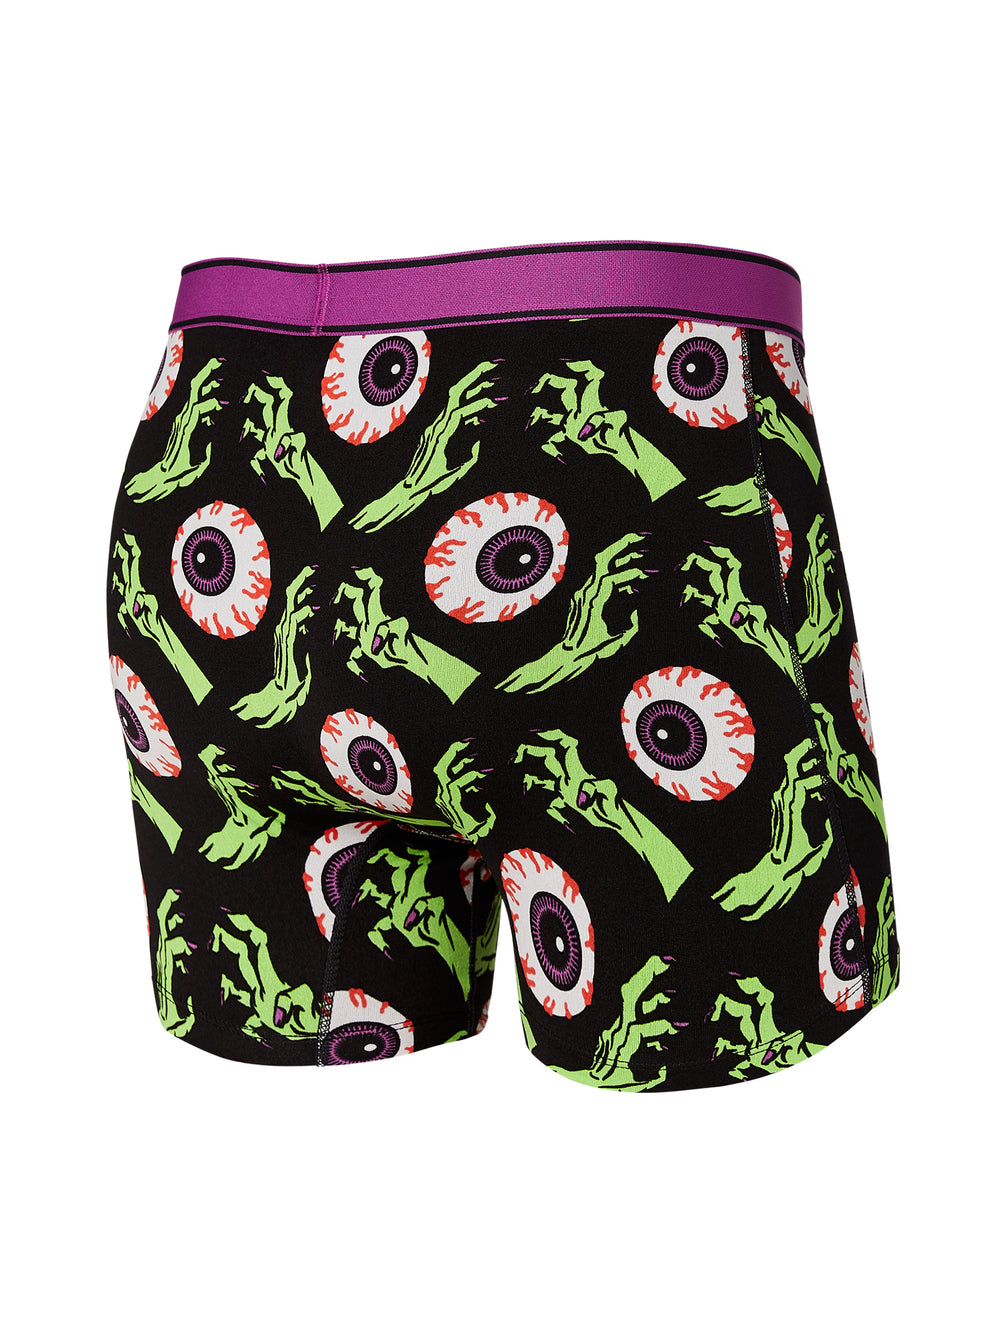 SAXX DAYTRIPPER BOXER BRIEF - ZOMBIE APOCLPS - CLEARANCE